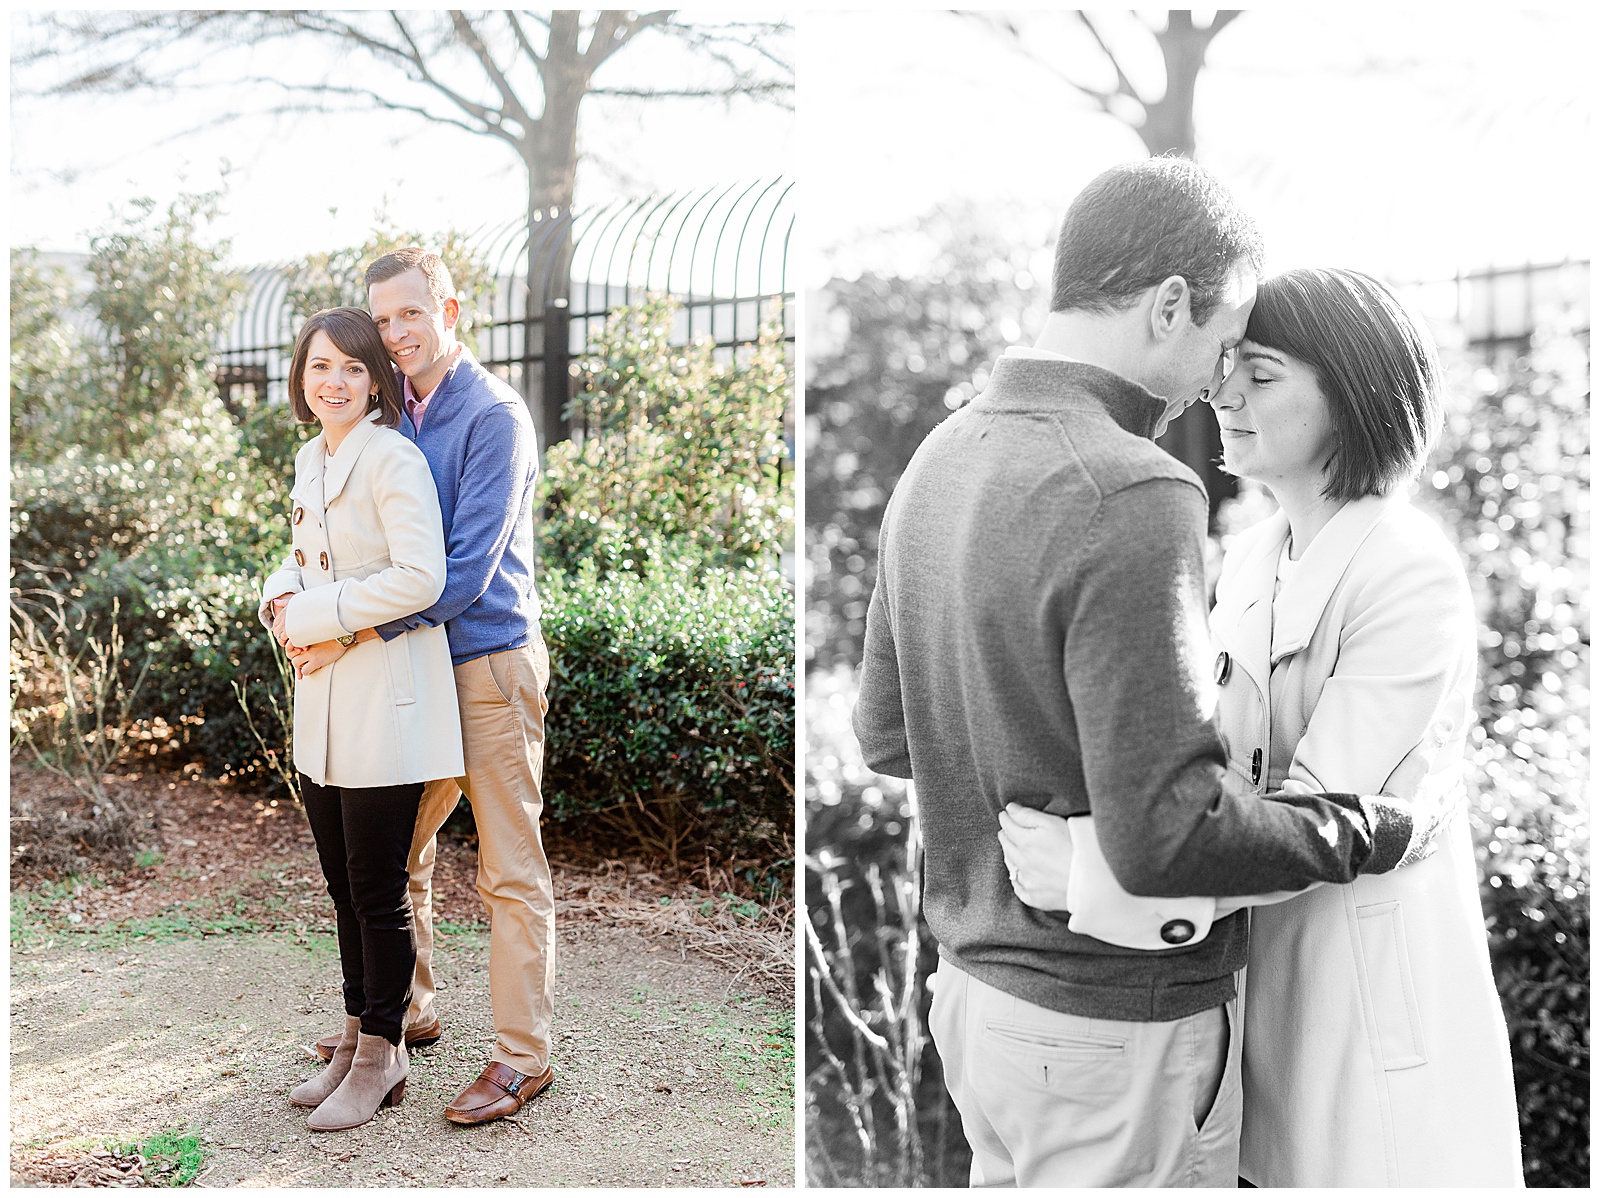 Sweet Couple in Park at Outdoor Winter Engagement Session in NC - white coat, short brown hair bride outfit ideas